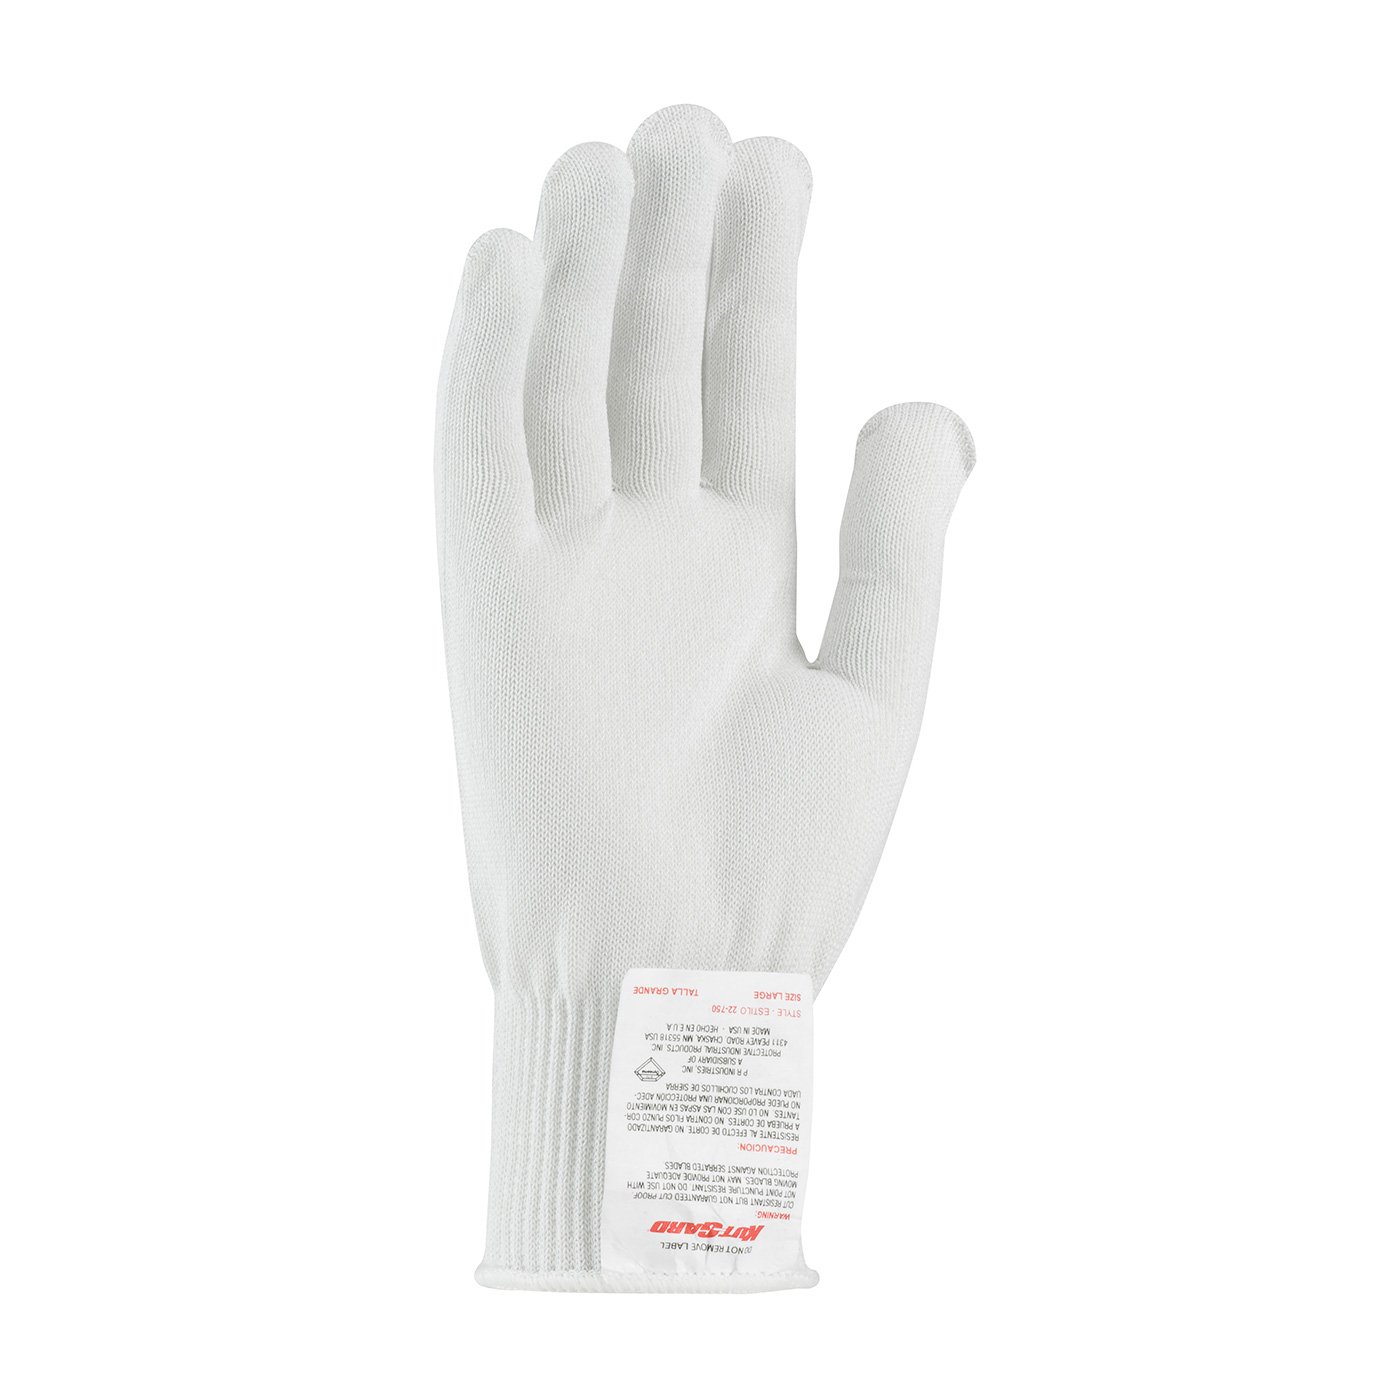 22-750 PIP® white Claw Cover® Seamless Knit Dyneema® Blended Antimicrobial Glove - Light Weight